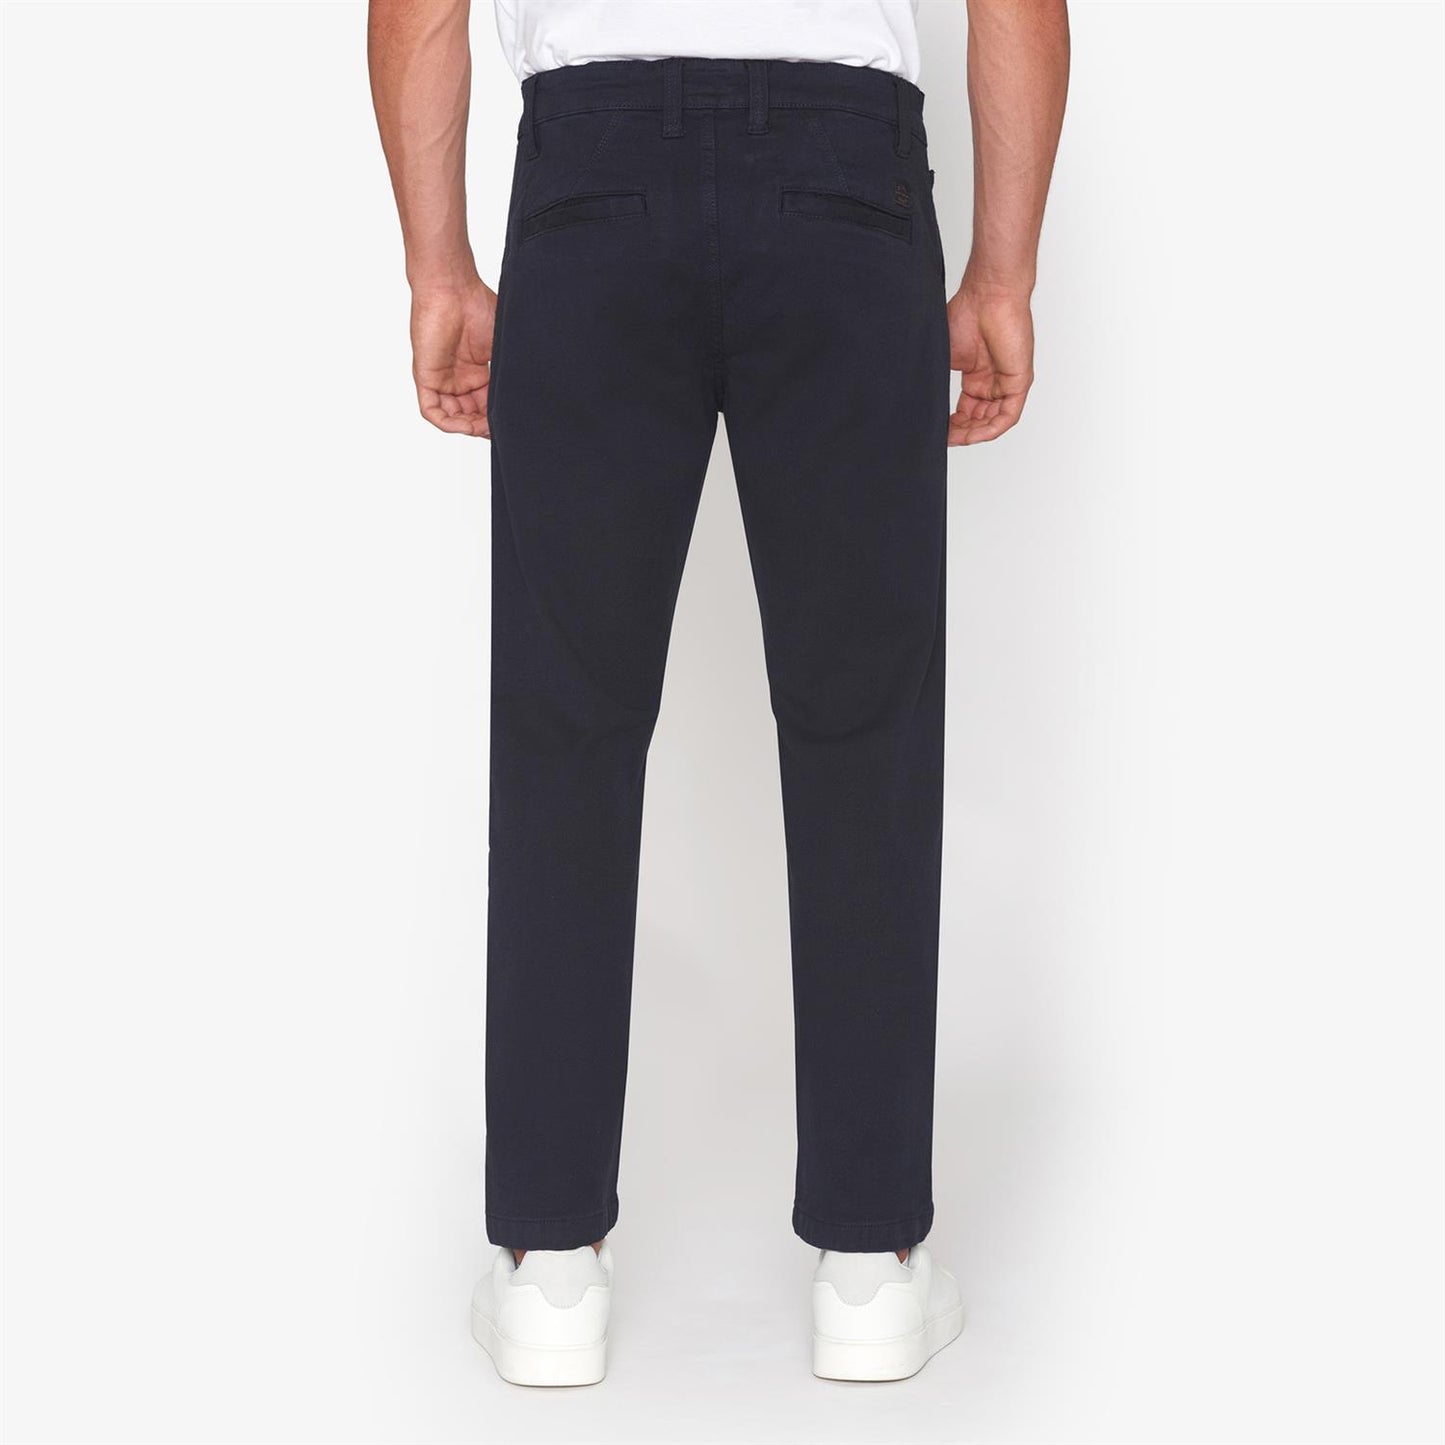 Signal Chuck structure pant